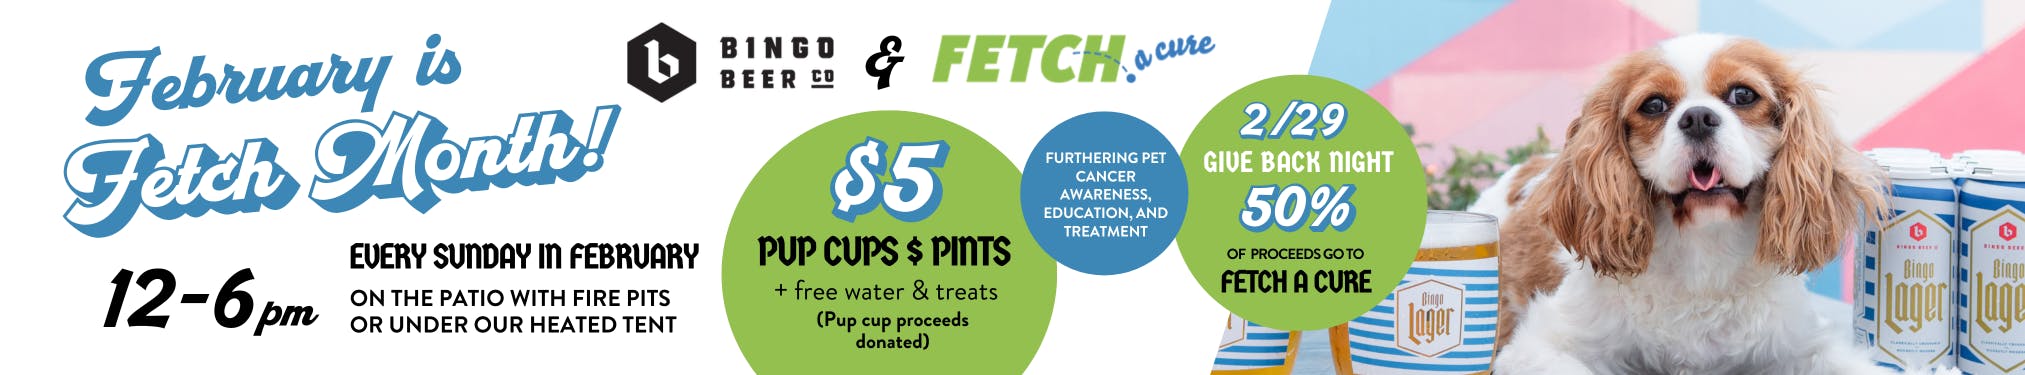 a banner describing Bingo's partnership with Fetch for a Cure - every sunday in february there will be a happy hour for dogs and humans with proceeds from pup cups going to Fetch a Cure funding dog cancer research